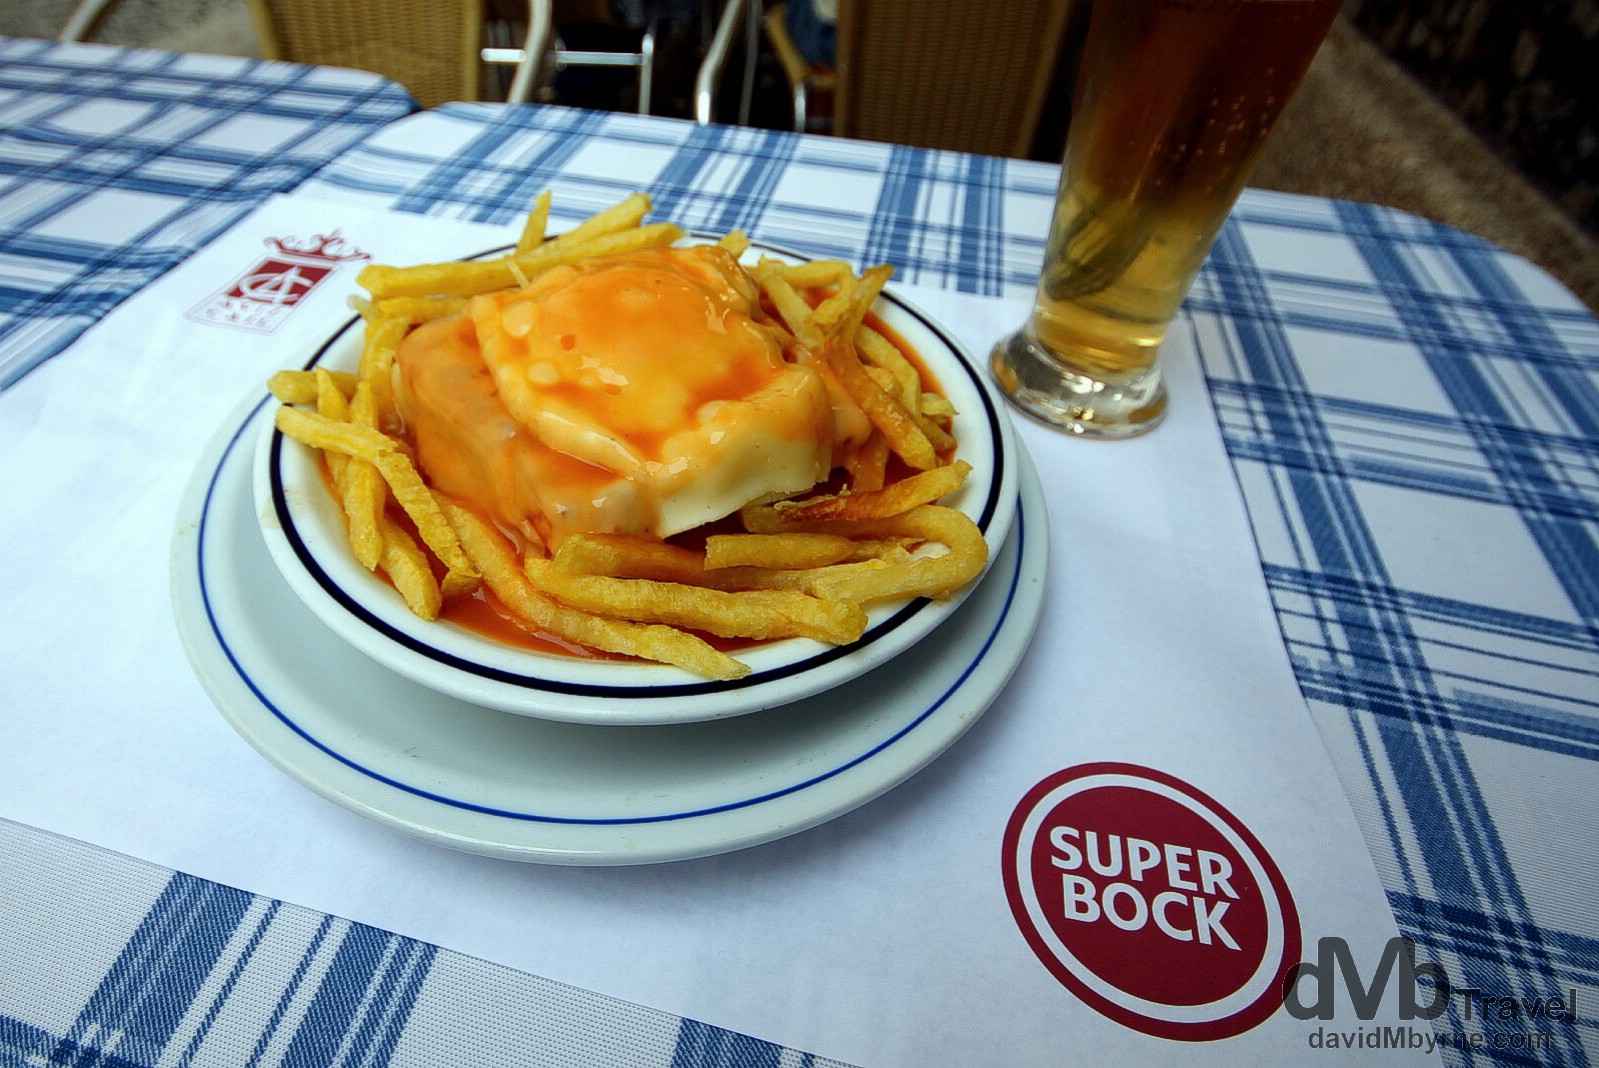 Francesinhas. The Little French Lady, or francesinha as it’s known to the locals, is a Porto 'speciality’ & by the looks of it a heart attack waiting to happen. Invented in the 1960s, it’s a popular dish in Porto while enjoying cult appeal elsewhere. It’s a sandwich, a stacked, messy one eaten with a knife & fork. There is no standard recipe (seemingly anything goes) and upon dissecting my AVIZ Café francesinha I found ham, egg, sausage, cheese & olive-infused luncheon meat, all covered in a red tomoto & beer-based sauce. Served with fries and washed down with a Super Bock is quintessential Porto. AVIZ Café, Porto, Portugal. August 28th 2013.